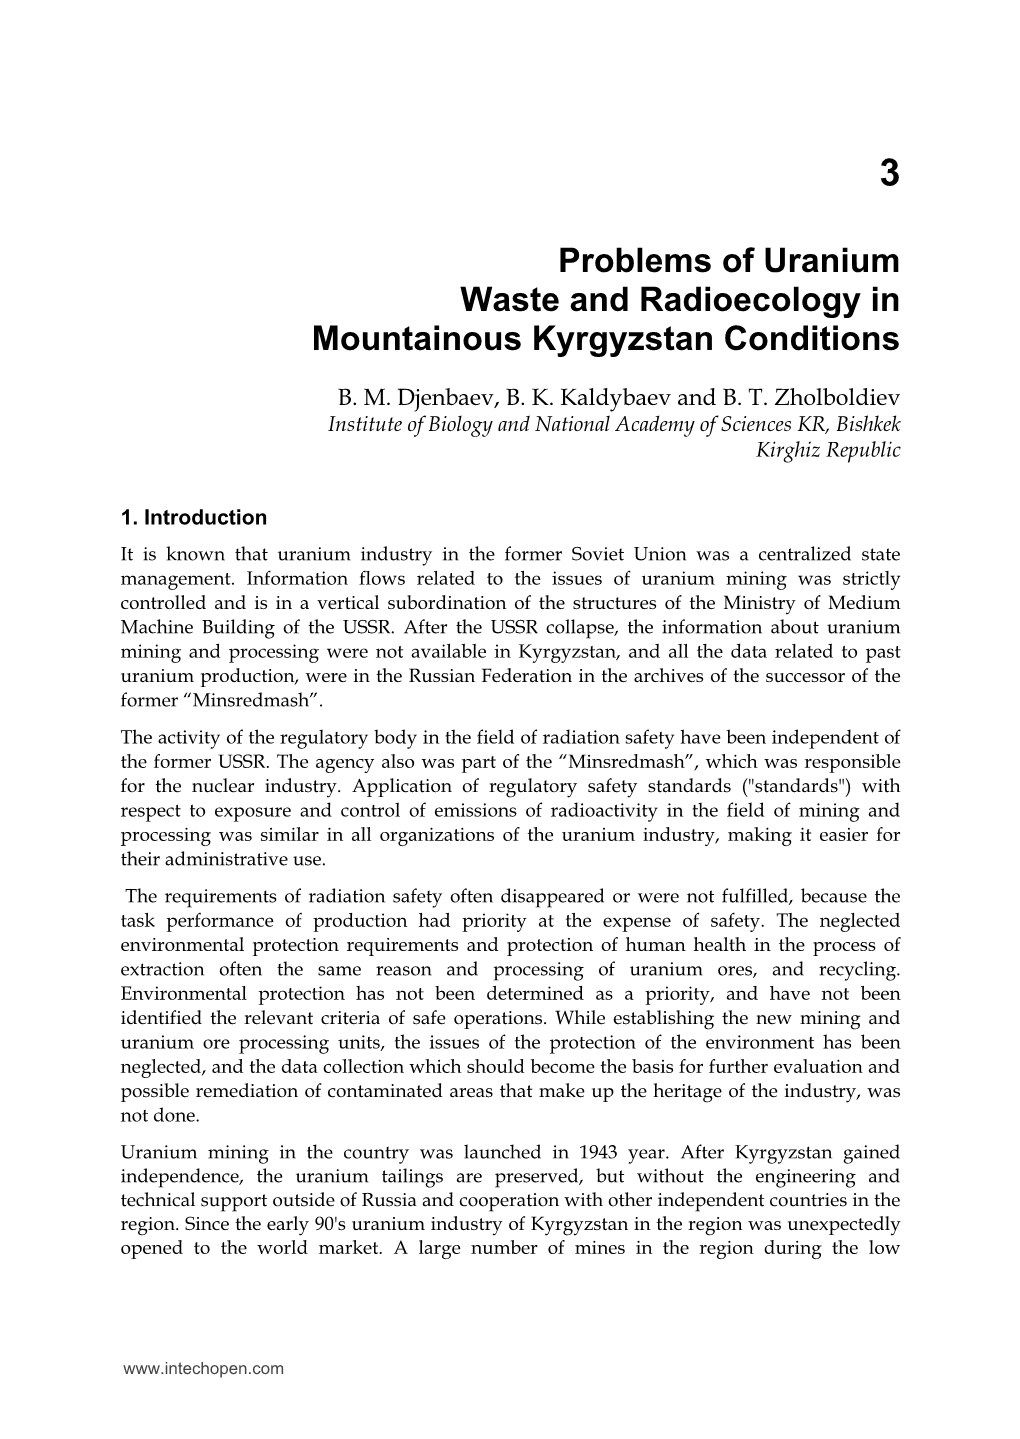 Problems of Uranium Waste and Radioecology in Mountainous Kyrgyzstan Conditions